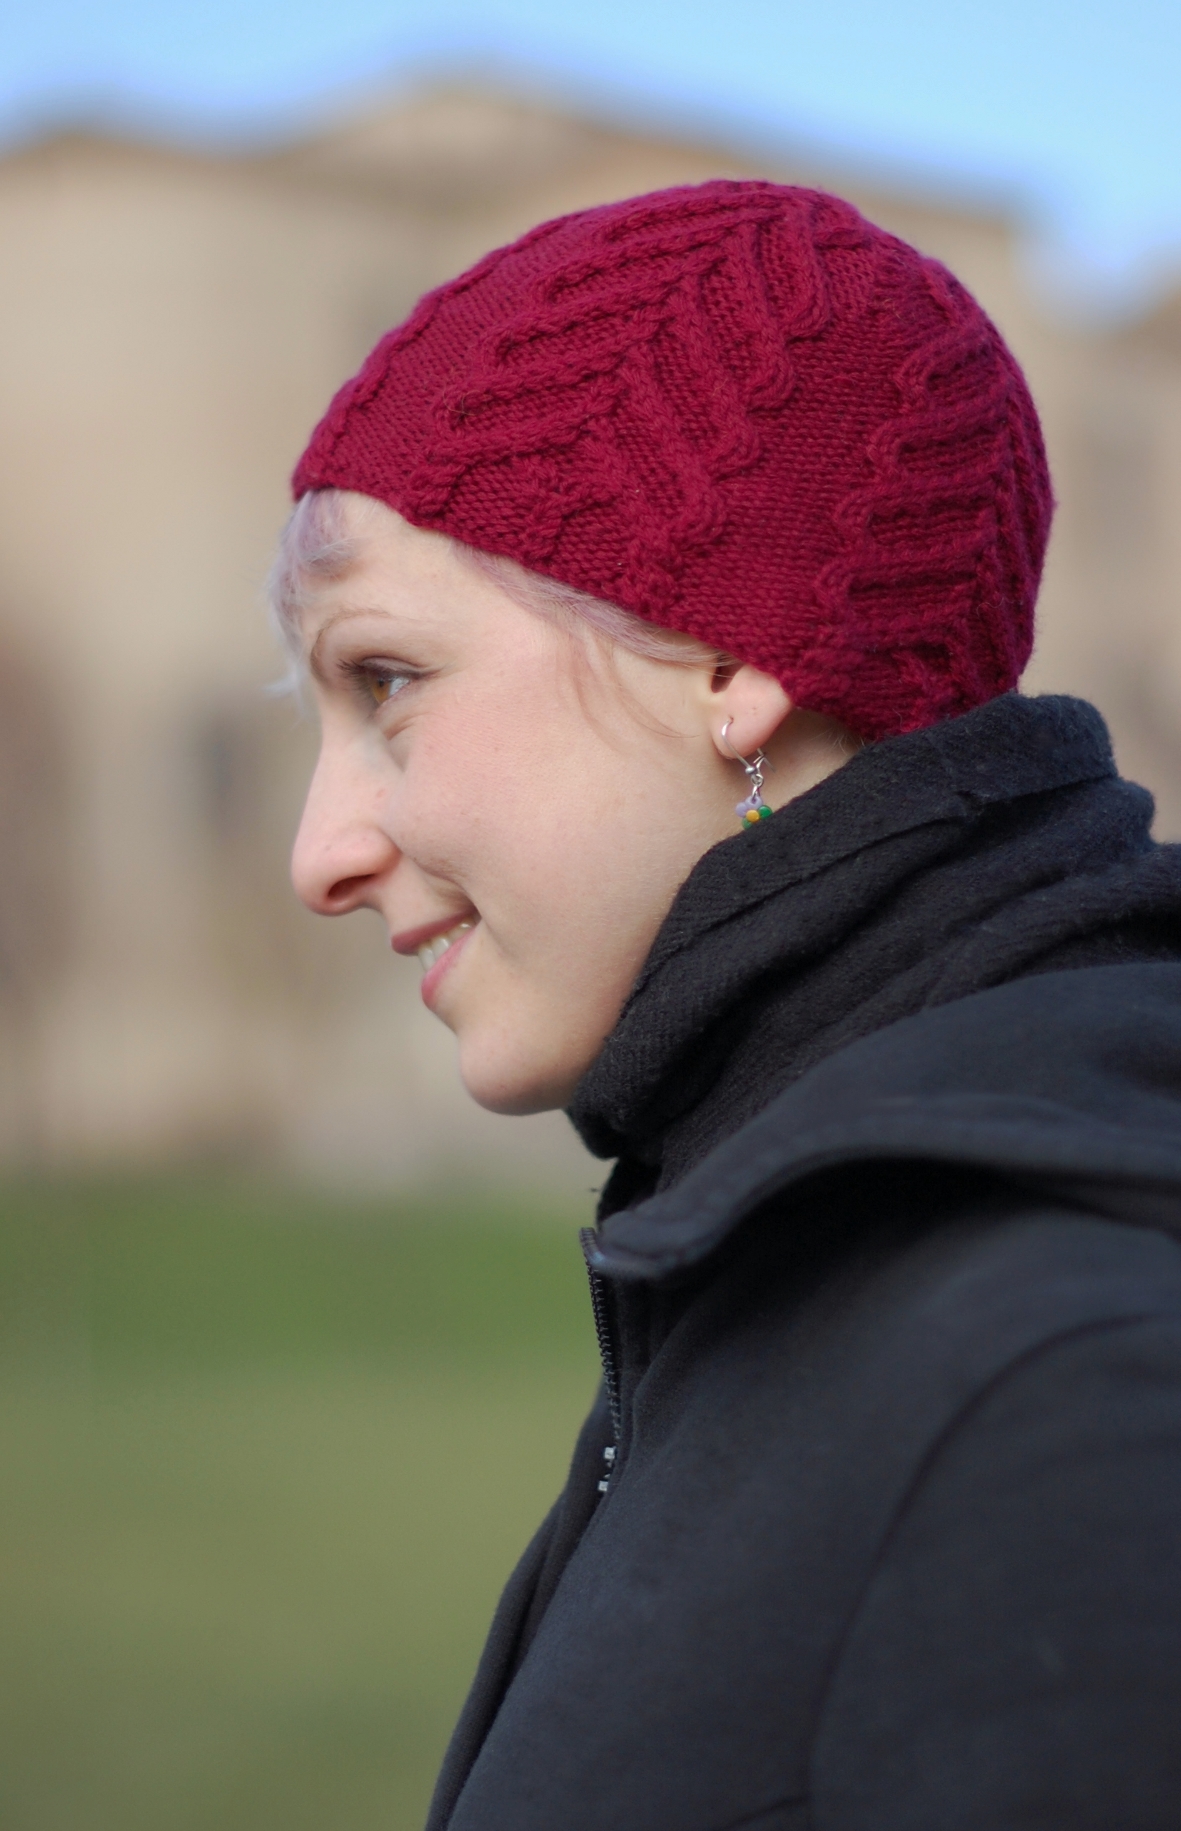 Freccia cabled cap knitting pattern